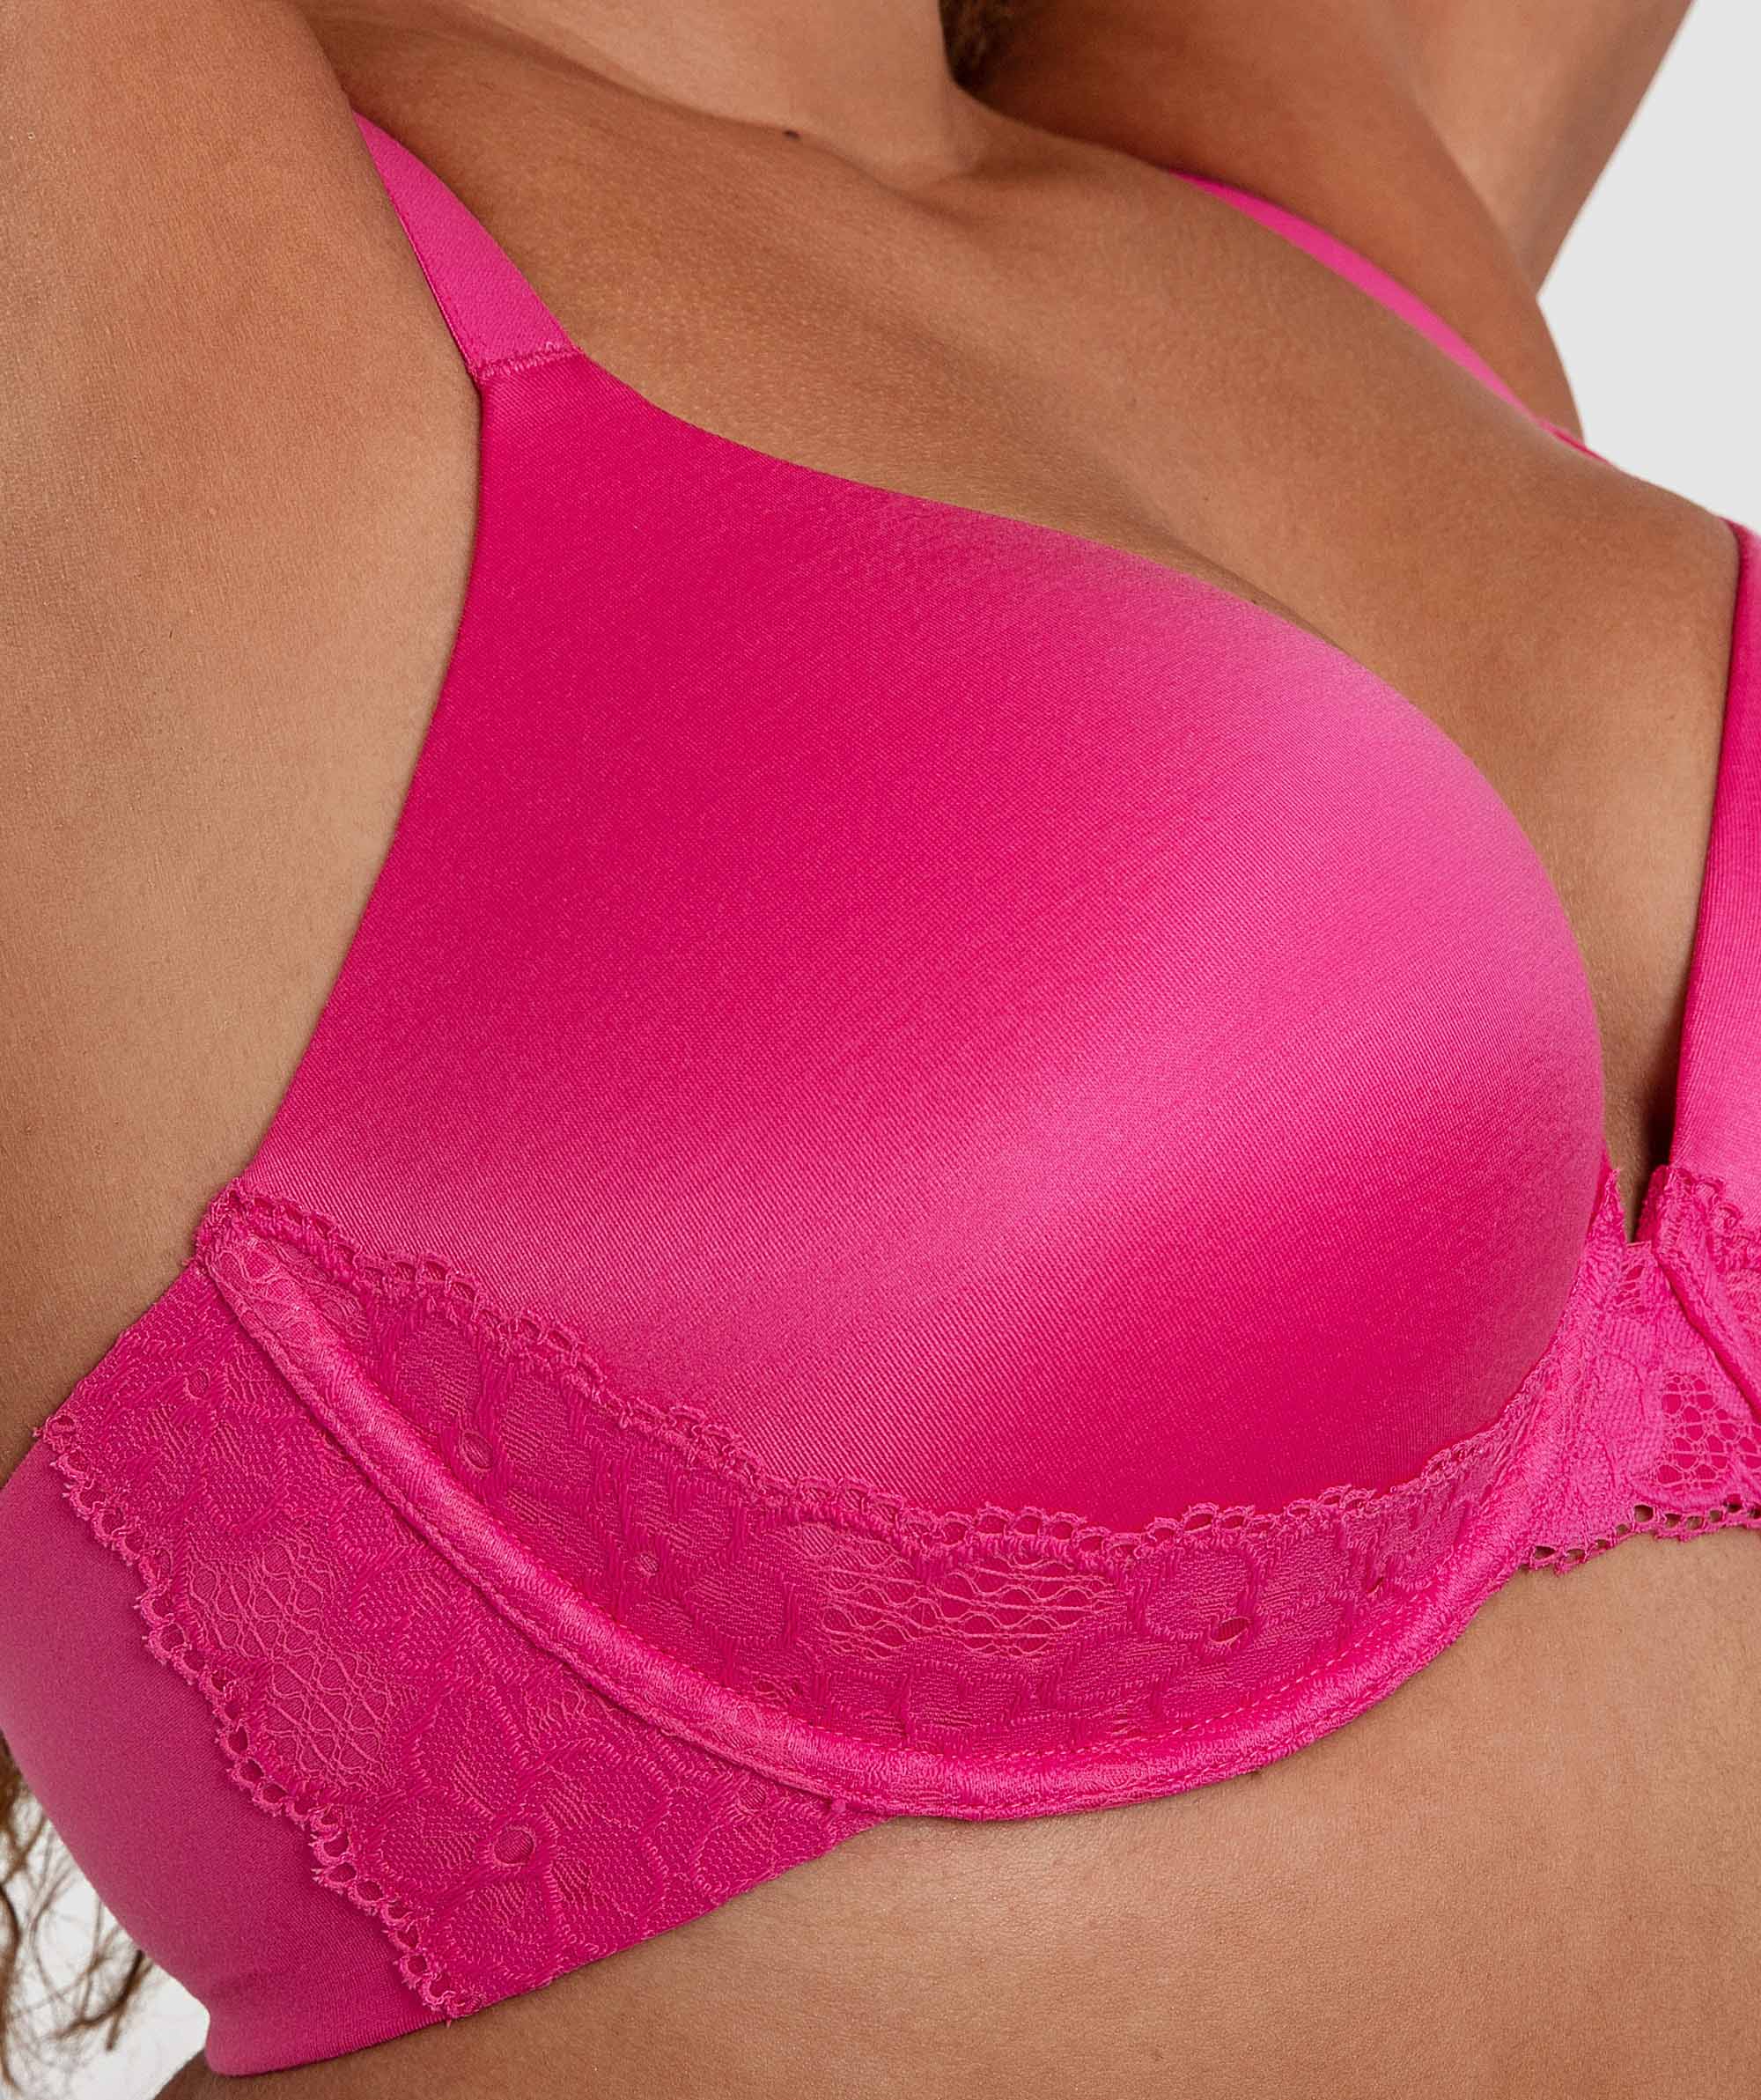 Planet Bliss Lace Full Cup Bra - Fuchsia Pink